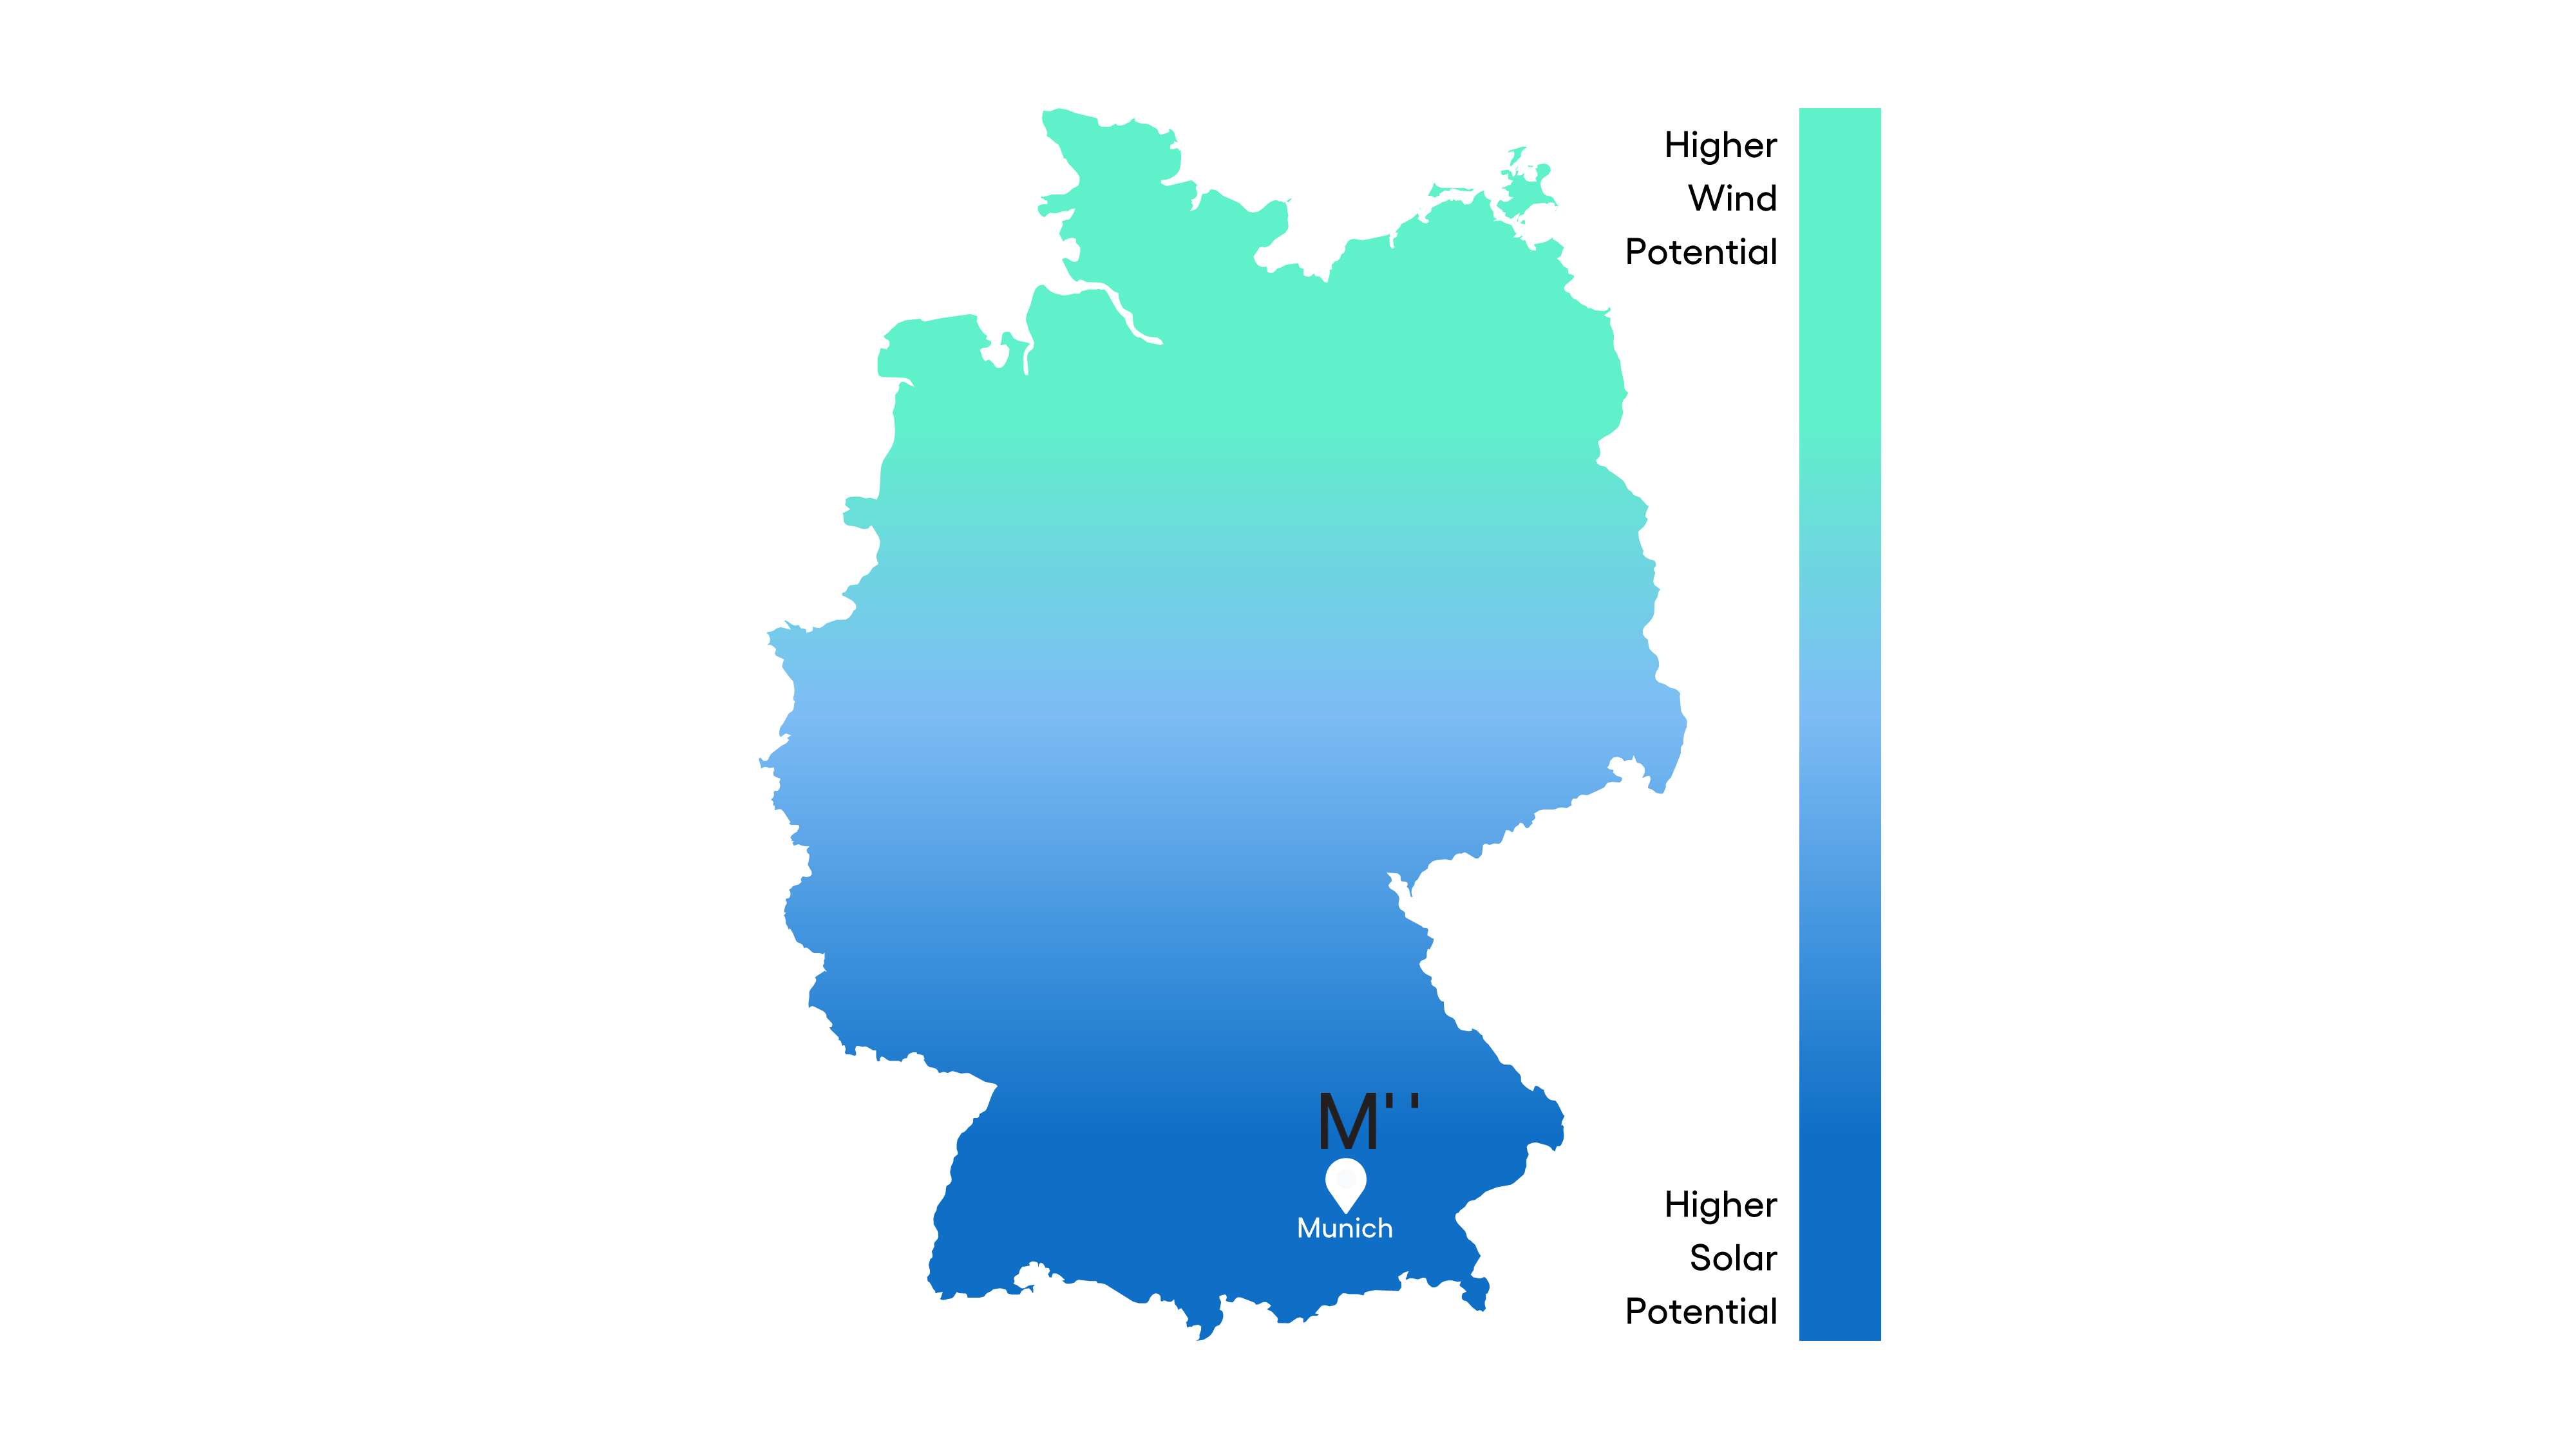 While the North of Germany is more suitable for Wind, the South is more suitable for solar energy